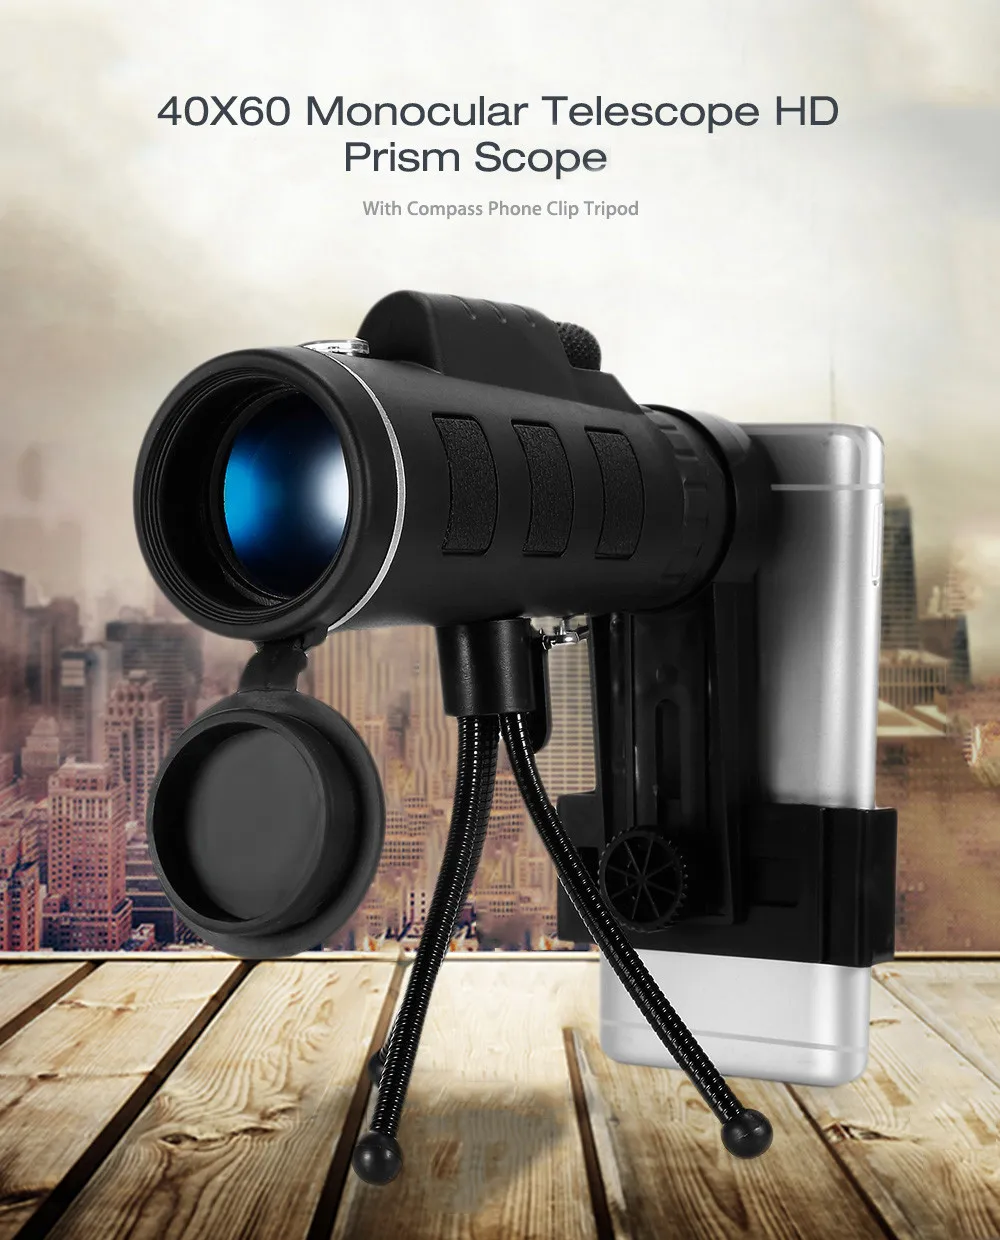 This 40X60 Telescope Zoom Scope with Compass Tripod Phone Clip is perfect for all of your outdoor adventures. Capturing those amazing photos and videos that you desire to share with your friends and family.  Makes great professional looking photos and videos for your online business, social medial sharing and putting on YouTube.